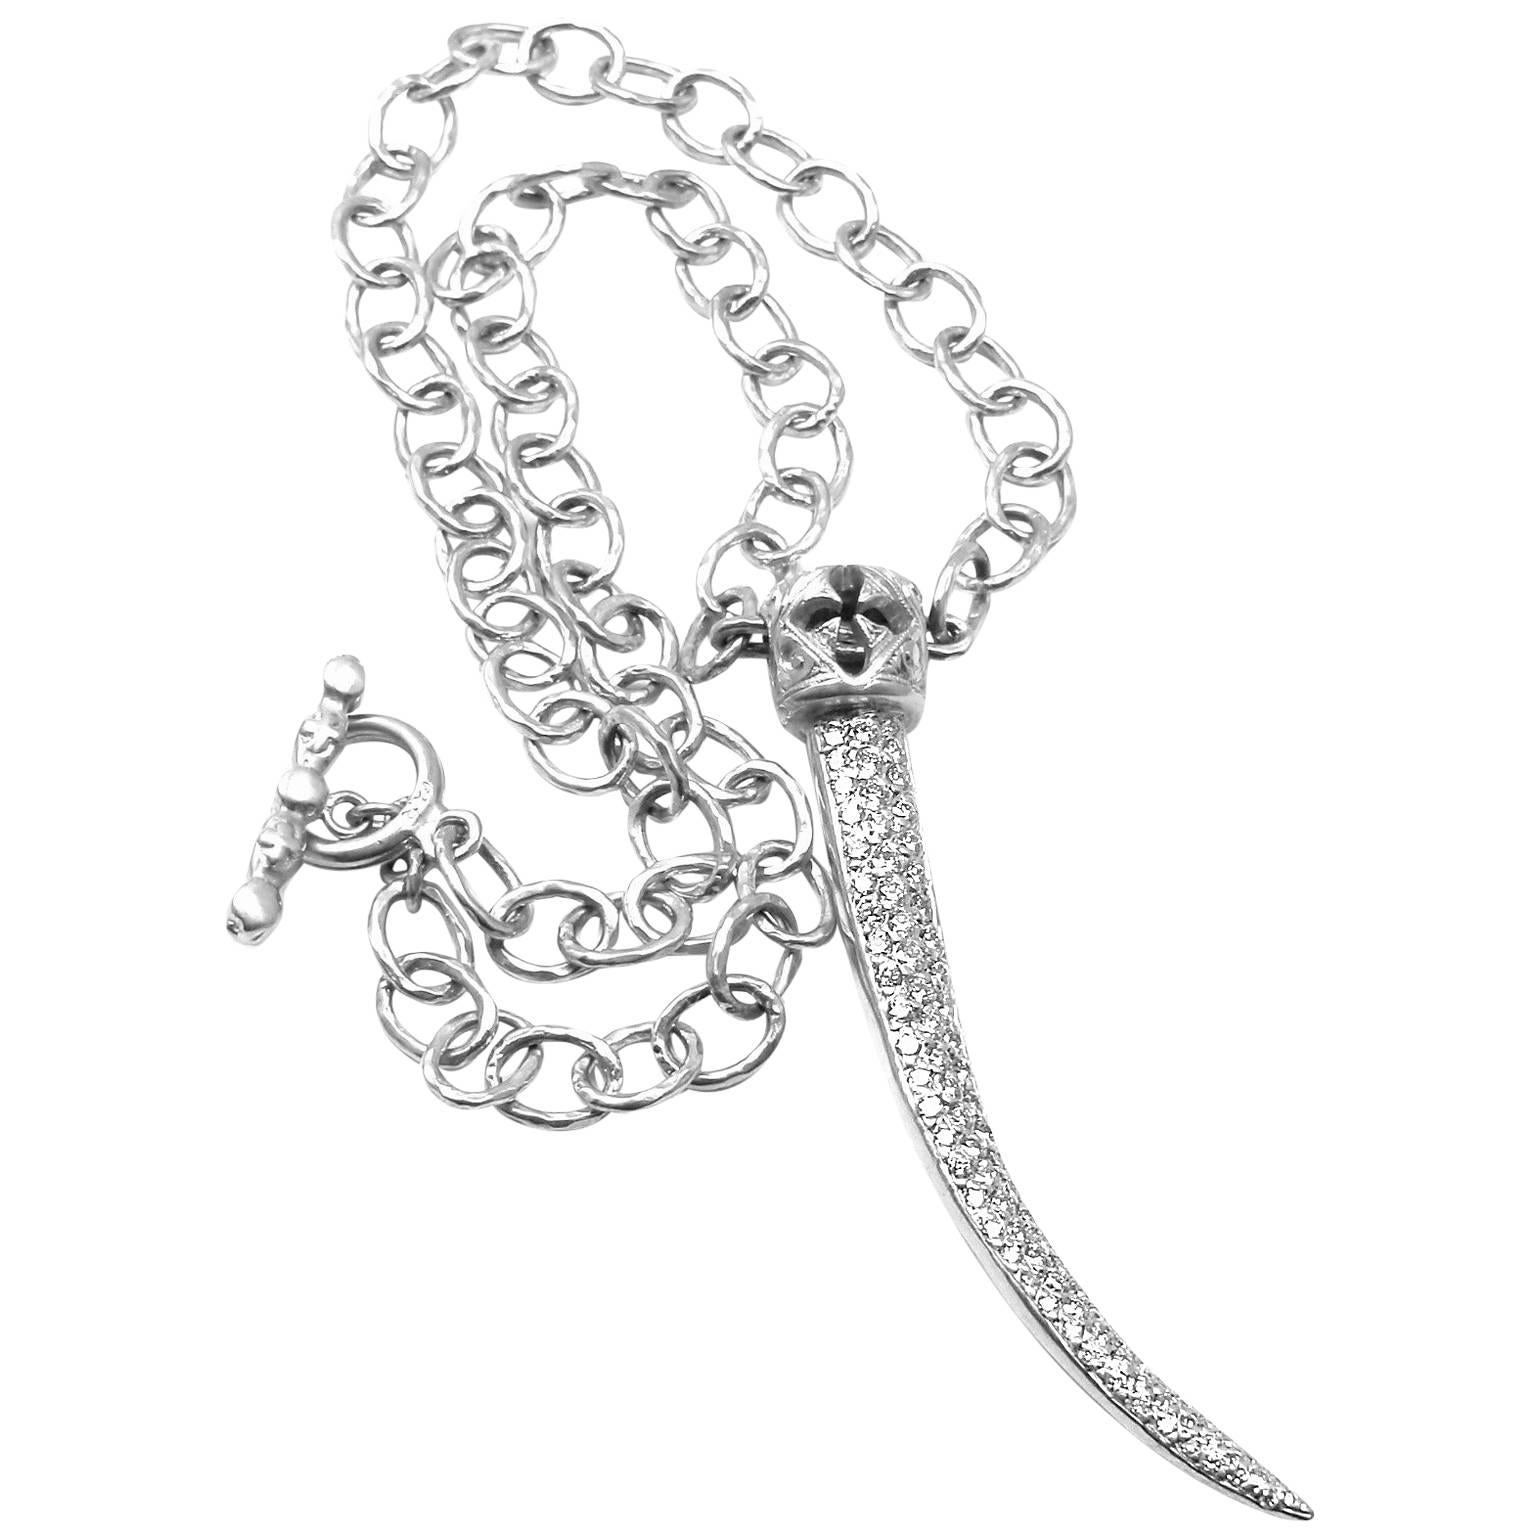 Loree Rodkin Claw Diamond Gold Pendant Necklace from Estate of Jackie Collins